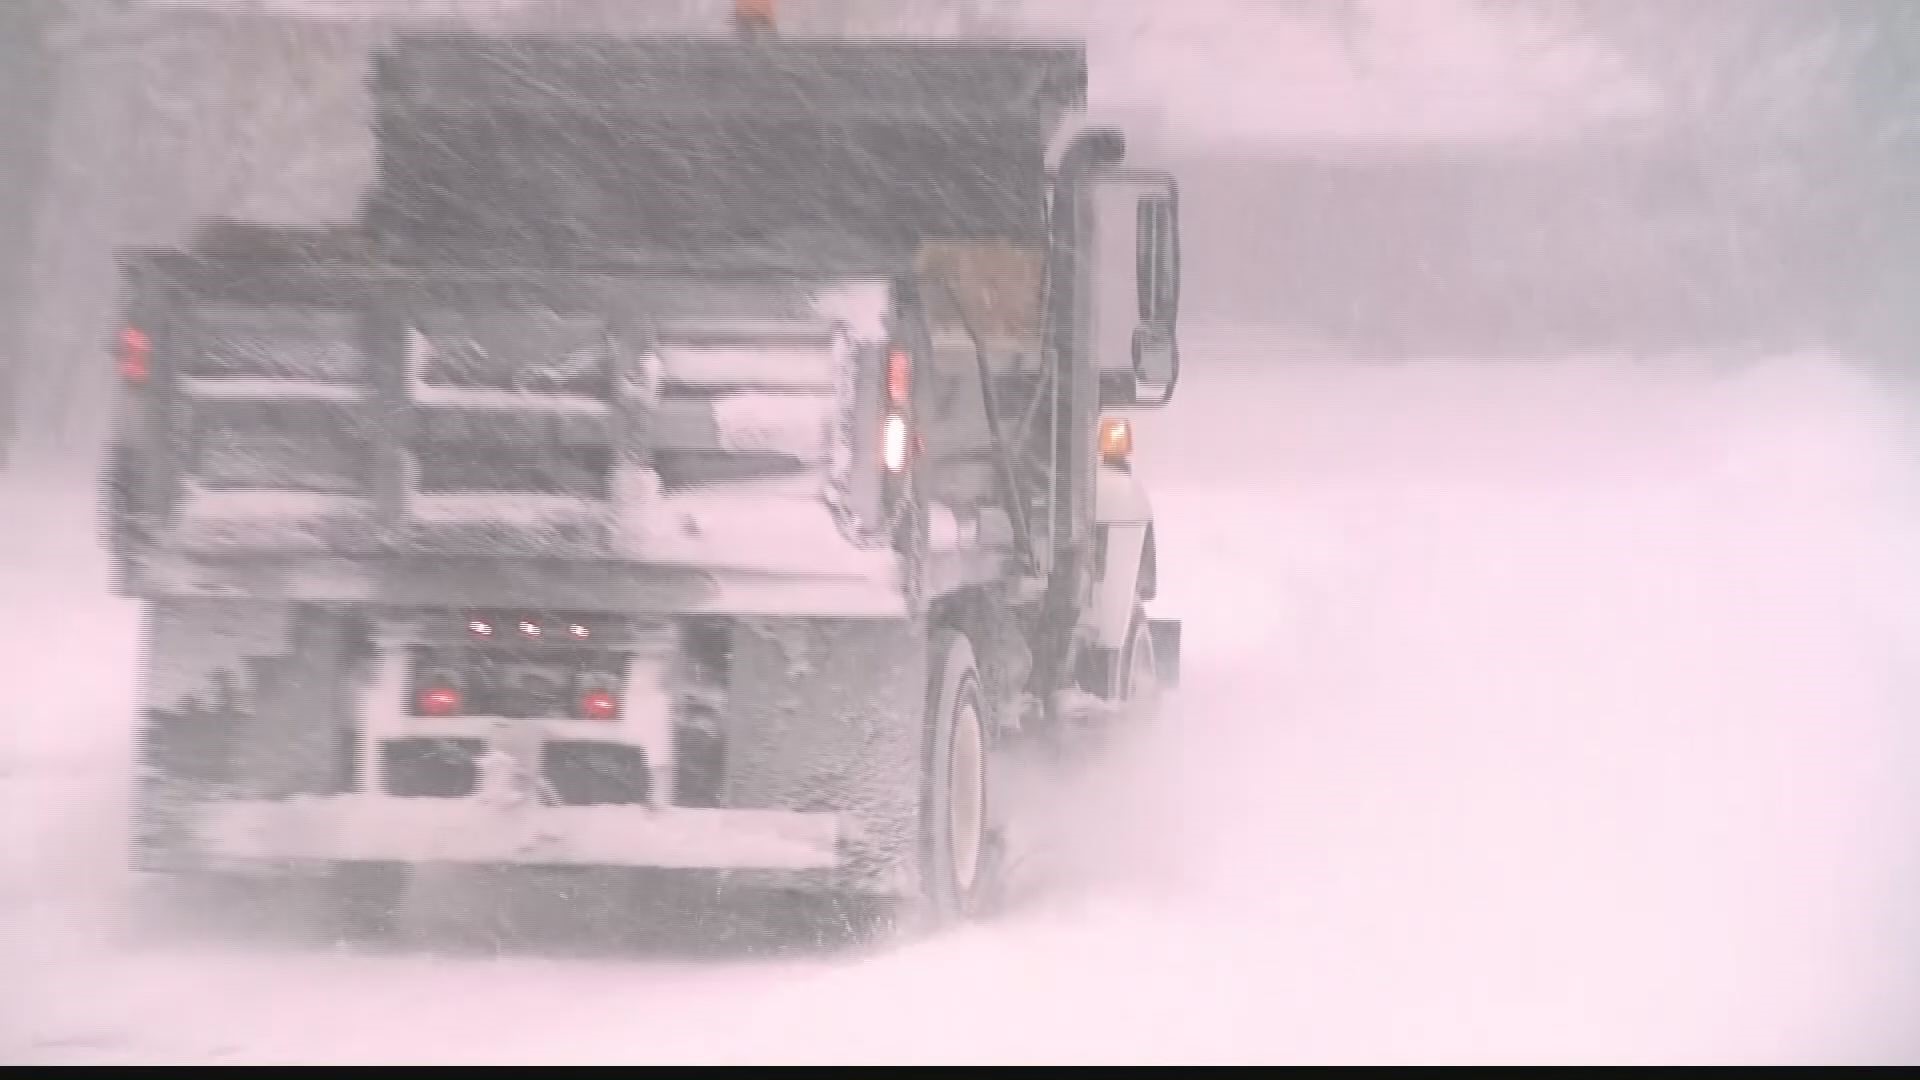 The Ottawa County Road Commission is fully staffed with plow truck drivers to clear this weekend's snowfall.